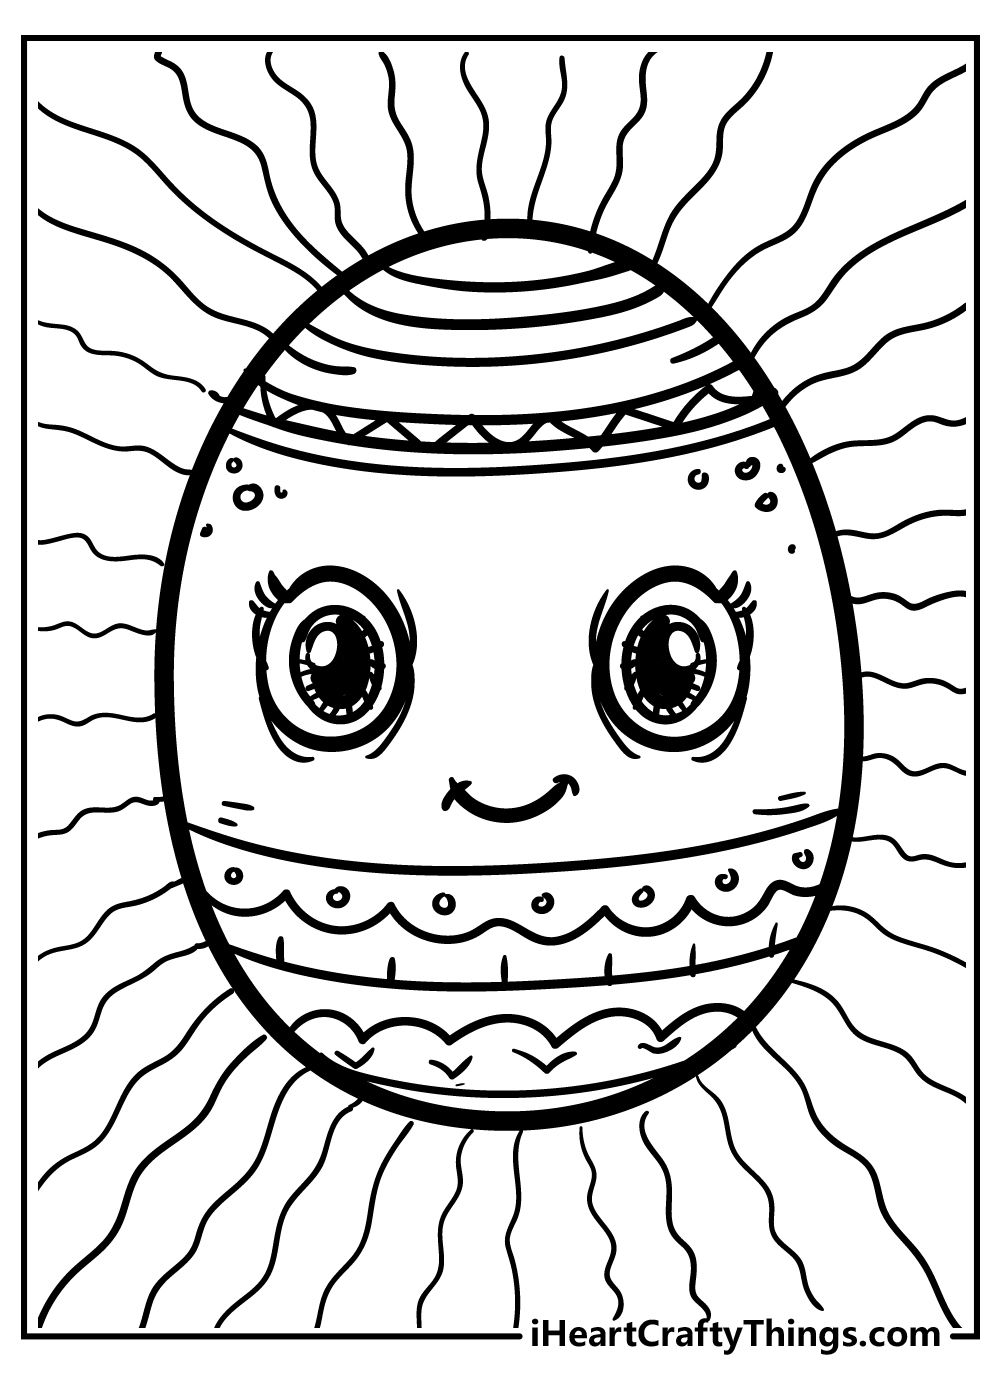 Easter egg coloring pages for preschoolers free printable